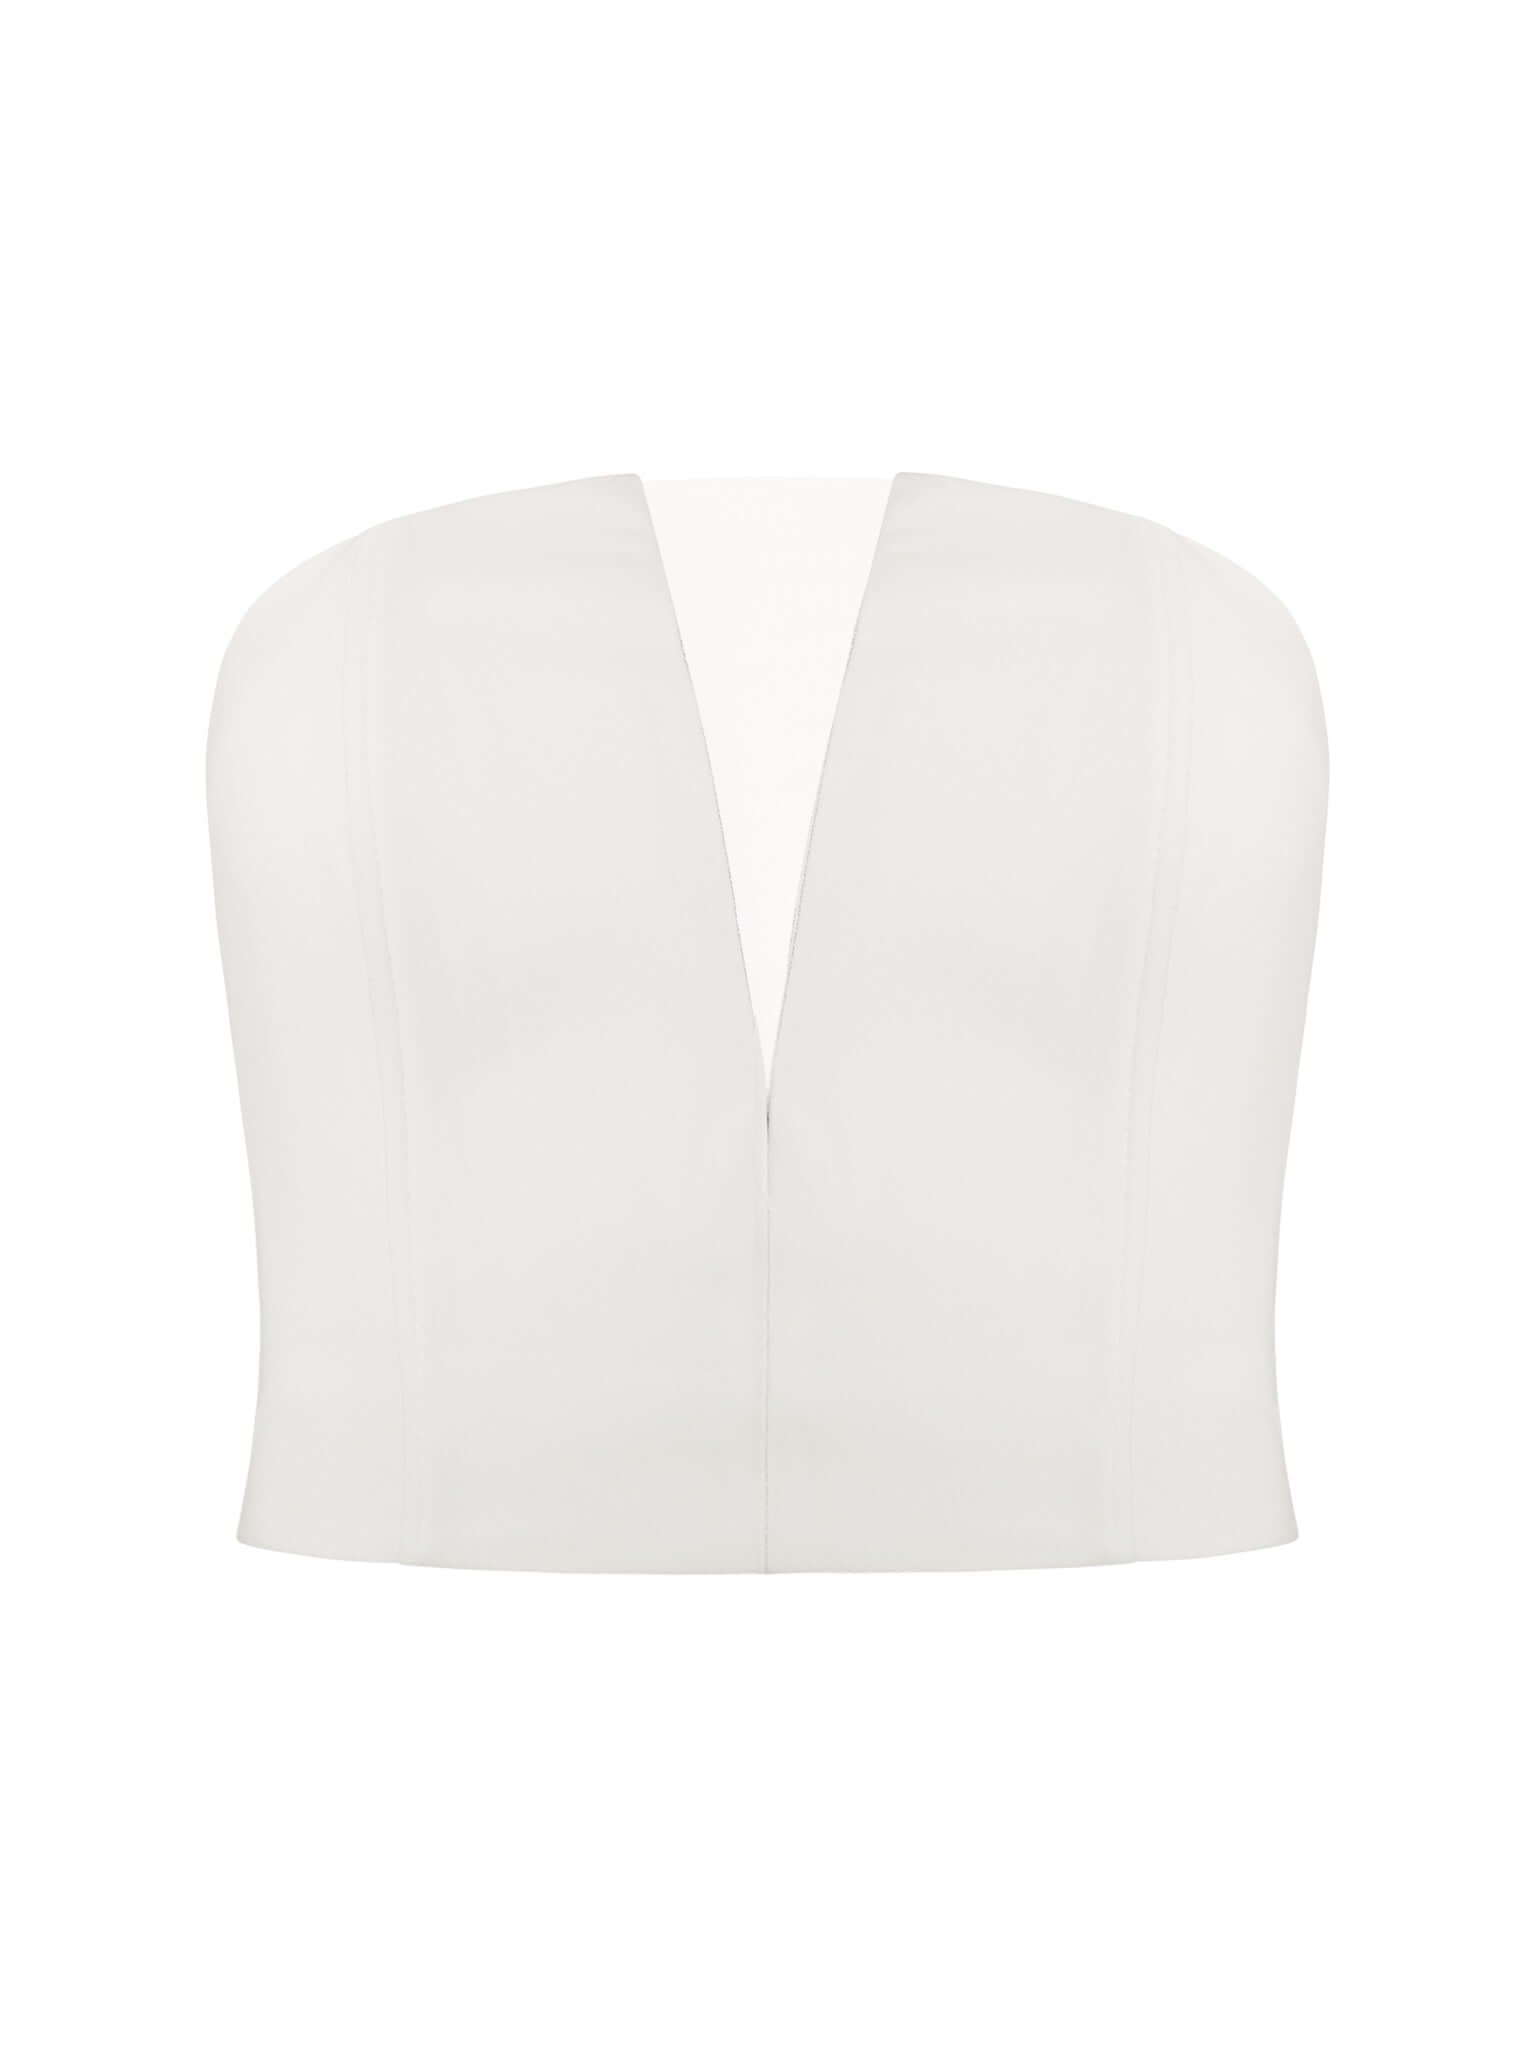 Rare Pearl Bustier Top With Criss-Cross Back by Tia Dorraine Women's Luxury Fashion Designer Clothing Brand